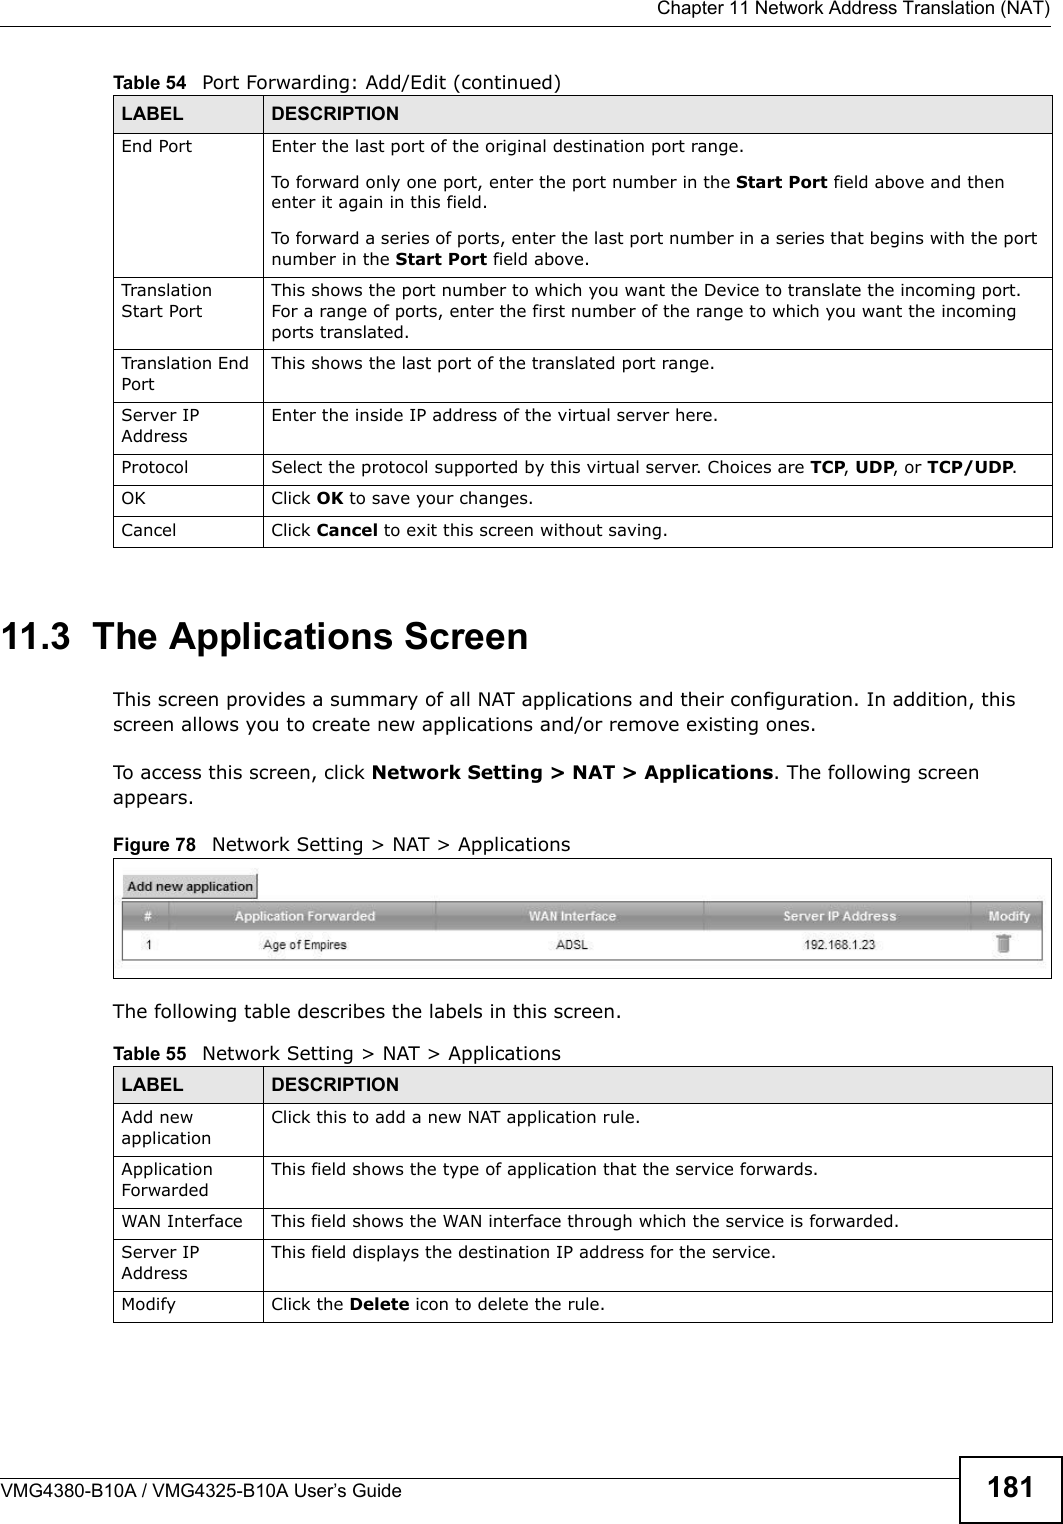  Chapter 11 Network Address Translation (NAT)VMG4380-B10A / VMG4325-B10A User’s Guide 18111.3  The Applications ScreenThis screen provides a summary of all NAT applications and their configuration. In addition, this screen allows you to create new applications and/or remove existing ones.To access this screen, click Network Setting &gt; NAT &gt; Applications. The following screenappears.Figure 78 Network Setting &gt; NAT &gt; ApplicationsThe following table describes the labels in this screen. End Port Enter the last port of the original destination port range. To forward only one port, enter the port number in the Start Port field above and then enter it again in this field. To forward a series of ports, enter the last port number in a series that begins with the portnumber in the Start Port field above.TranslationStart PortThis shows the port number to which you want the Device to translate the incoming port.For a range of ports, enter the first number of the range to which you want the incomingports translated.Translation EndPortThis shows the last port of the translated port range.Server IP AddressEnter the inside IP address of the virtual server here.Protocol Select the protocol supported by this virtual server. Choices are TCP, UDP, or TCP/UDP.OK Click OK to save your changes.Cancel Click Cancel to exit this screen without saving.Table 54   Port Forwarding: Add/Edit (continued)LABEL DESCRIPTIONTable 55   Network Setting &gt; NAT &gt; ApplicationsLABEL DESCRIPTIONAdd new applicationClick this to add a new NAT application rule.ApplicationForwardedThis field shows the type of application that the service forwards.WAN Interface This field shows the WAN interface through which the service is forwarded.Server IP AddressThis field displays the destination IP address for the service.Modify Click the Delete icon to delete the rule.